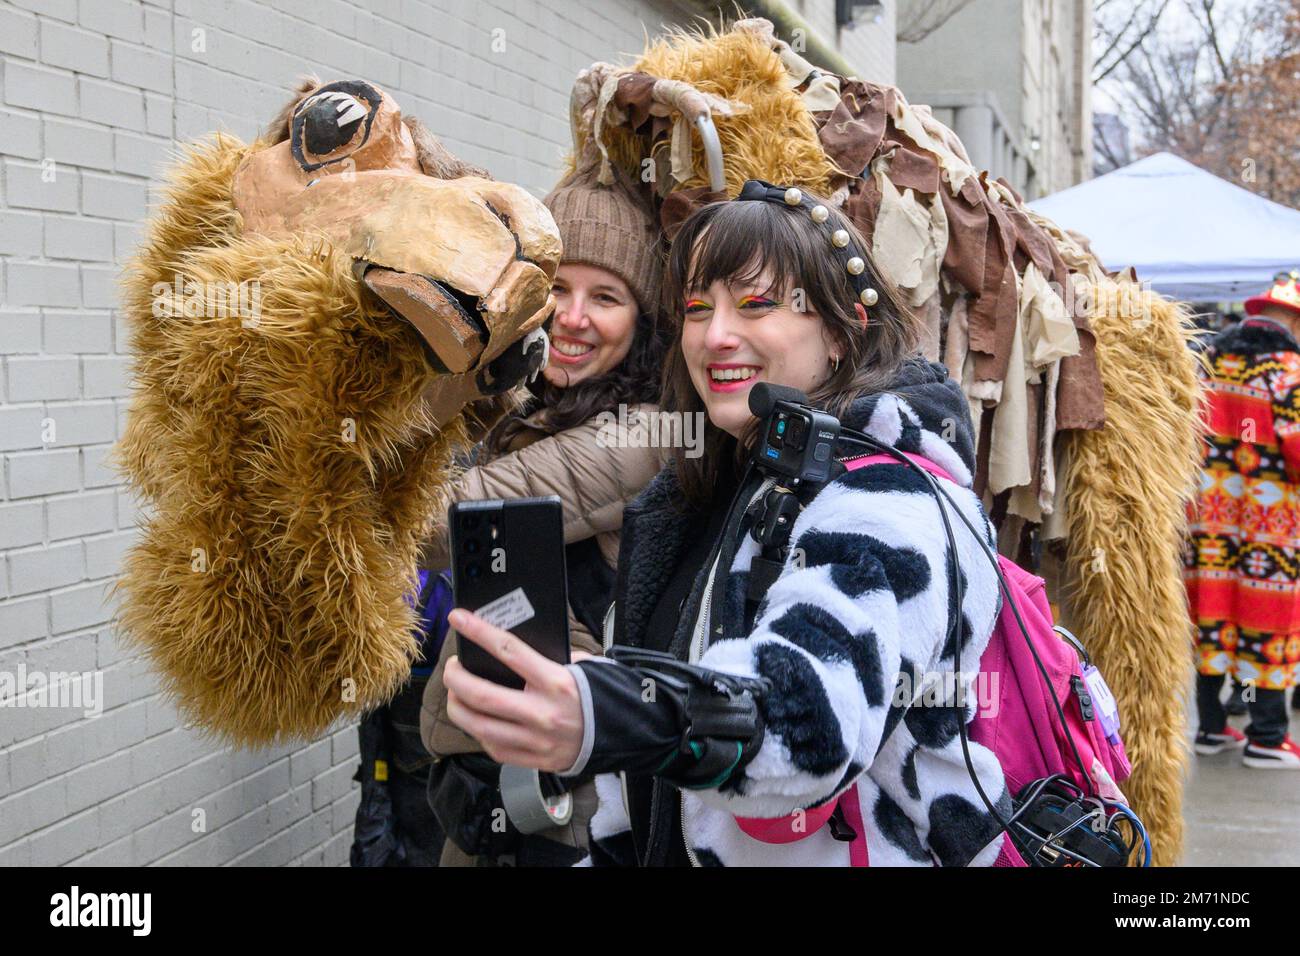 New York, USA. 6th Jan, 2023. A participant takes a selfie with a camel figure in the streets in East Harlem during the 46th annual Three Kings Day Parade organized by El Museo del Barrio. The traditional Spanish celebration was held in person for the first time since the start of the coronavirus (COVID-19) pandemic. The theme for this year was: 'Entre Familia: Mental Health & Wellness of our Communities' focusing on the importance of mental health and wellness. Credit: Enrique Shore/Alamy Live News Stock Photo